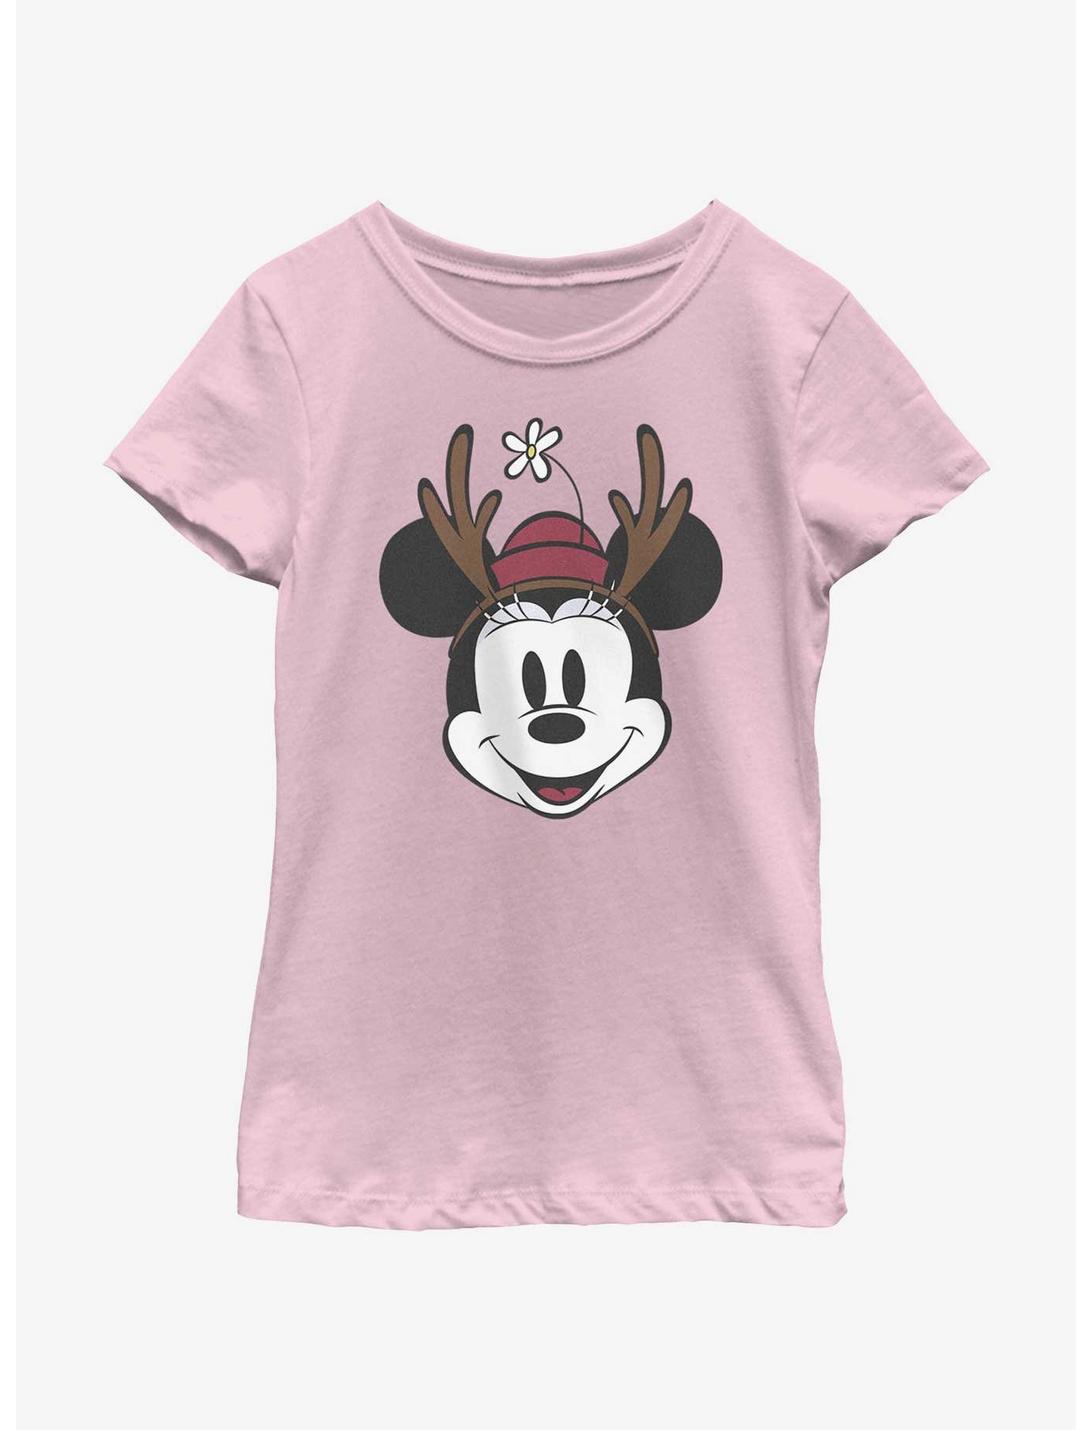 Disney Minnie Mouse Minnie Antlers Youth Girls T-Shirt, PINK, hi-res